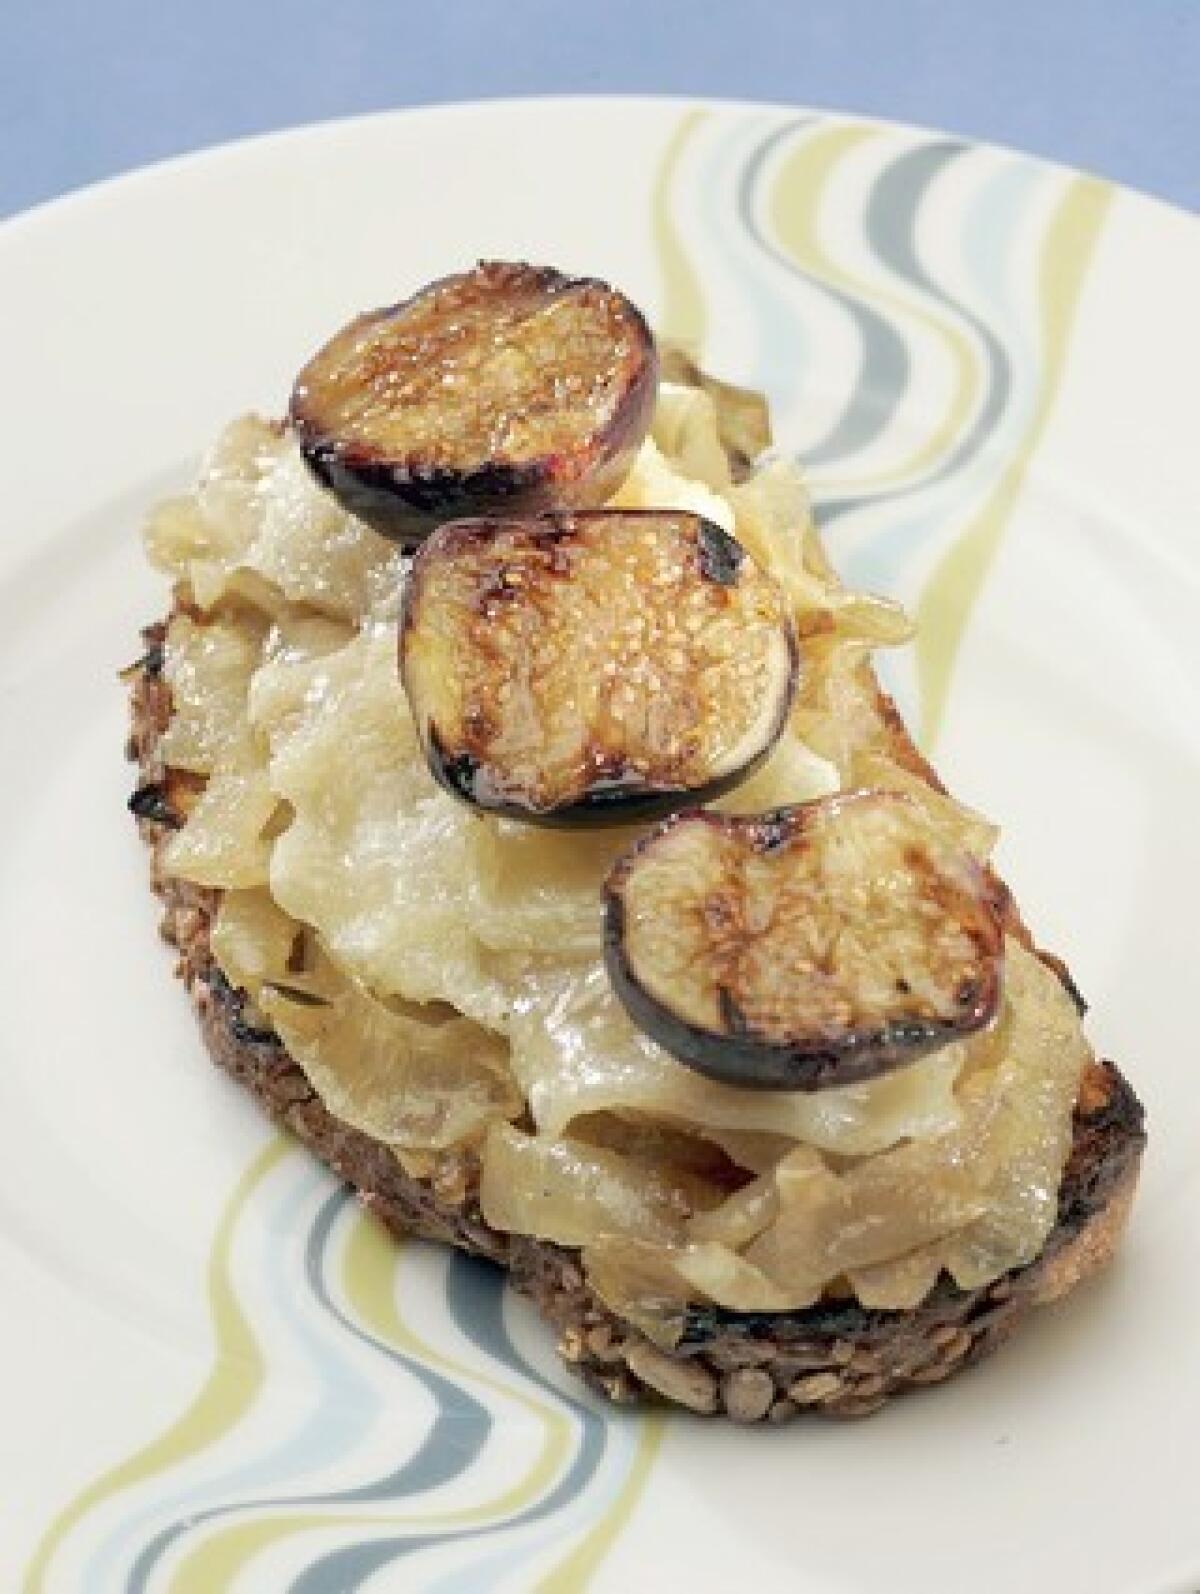 Figs lend a sweet twist on sandwiches. Recipe: open-face Manchego and fig sandwich